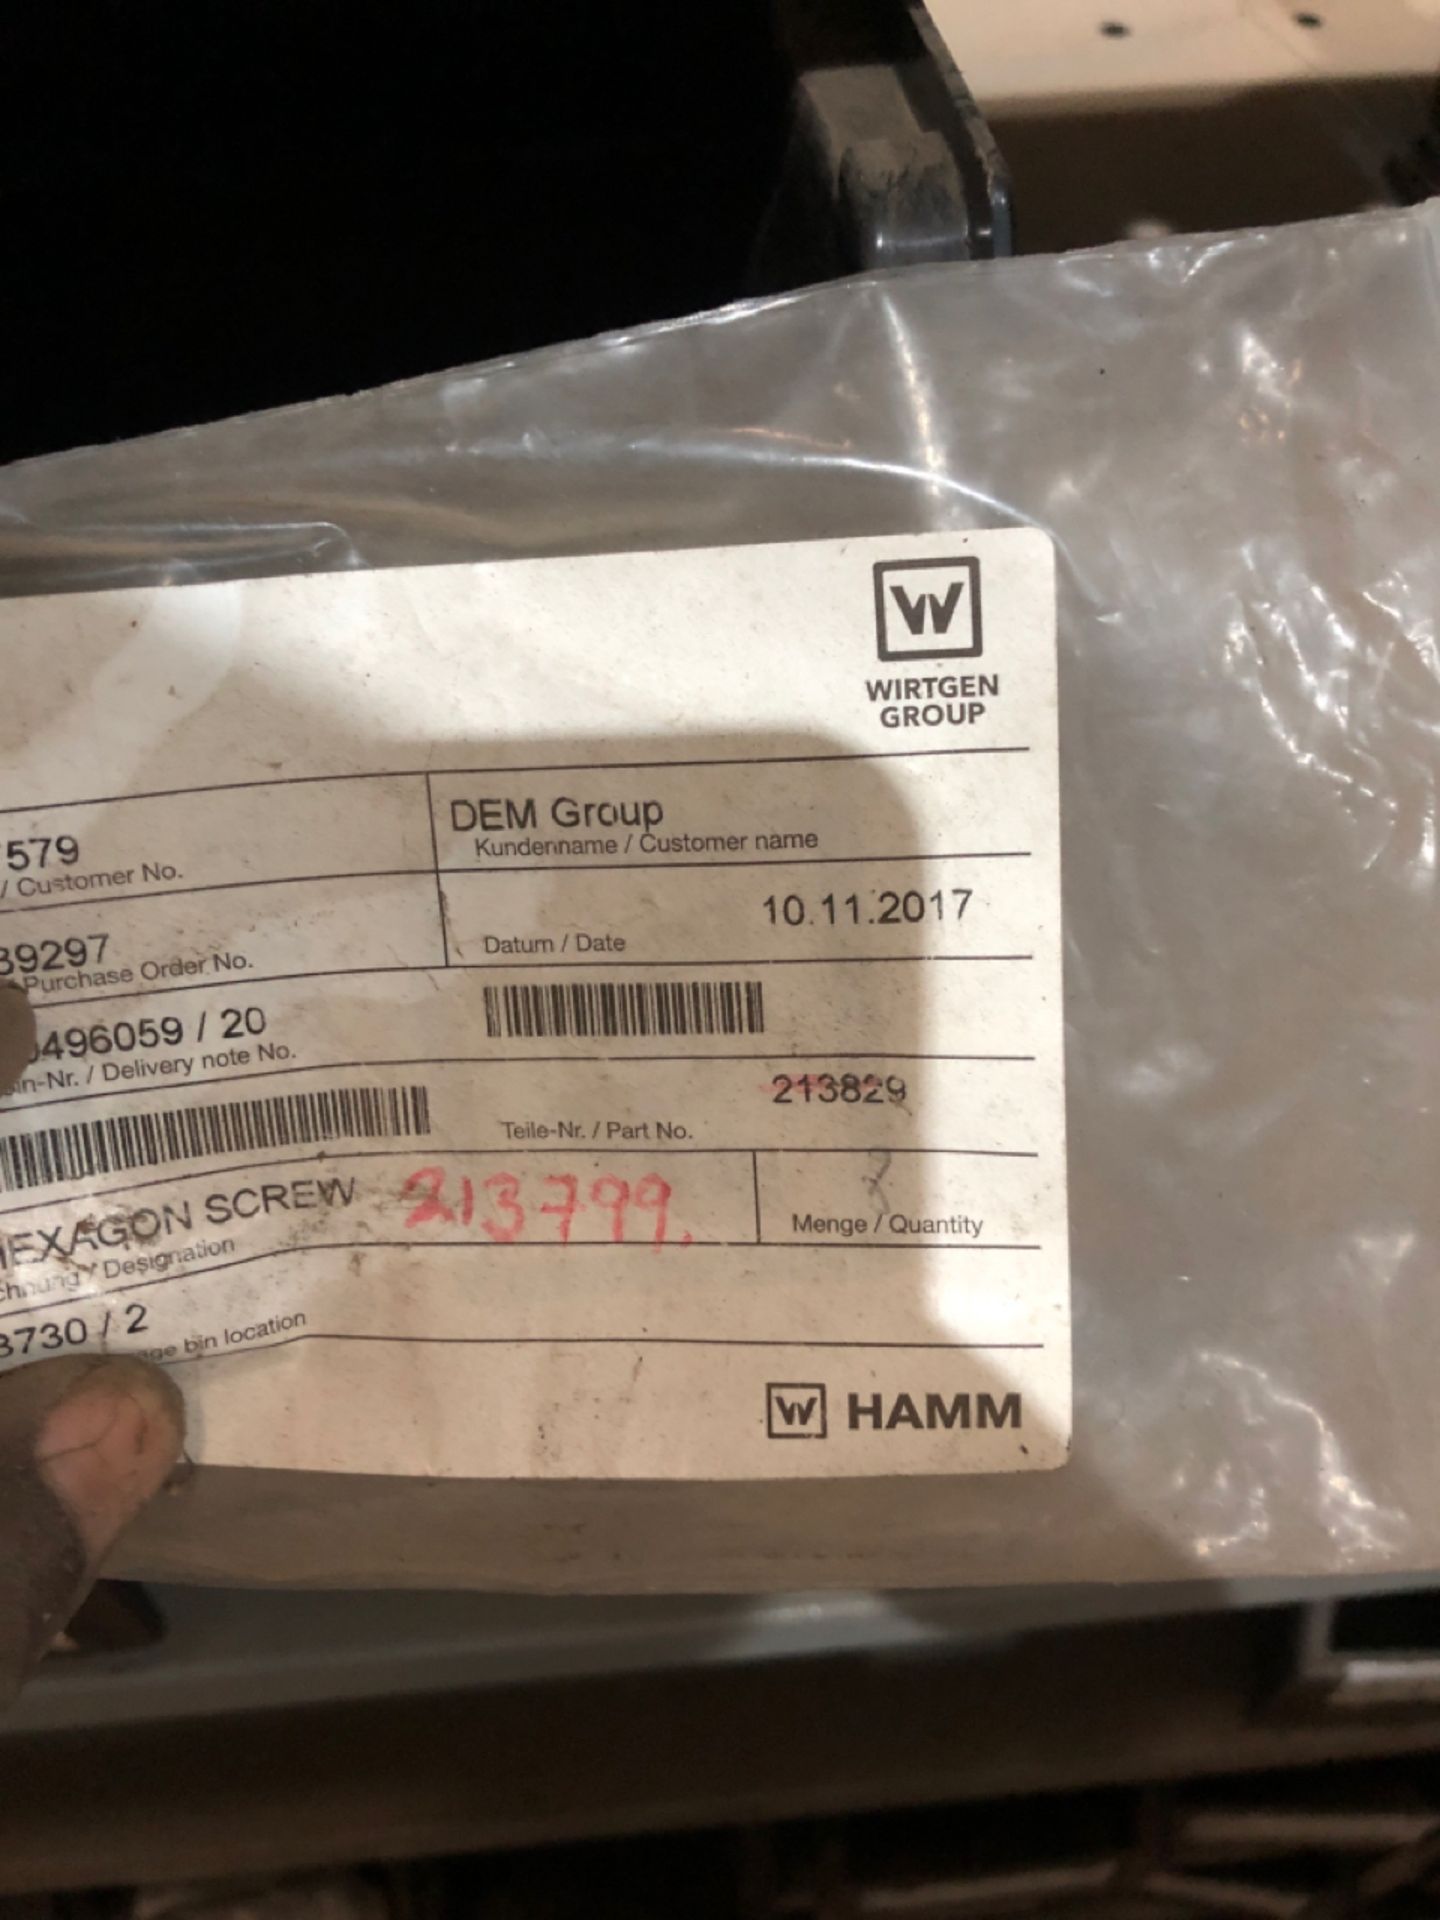 HAMM Spares - Image 87 of 98